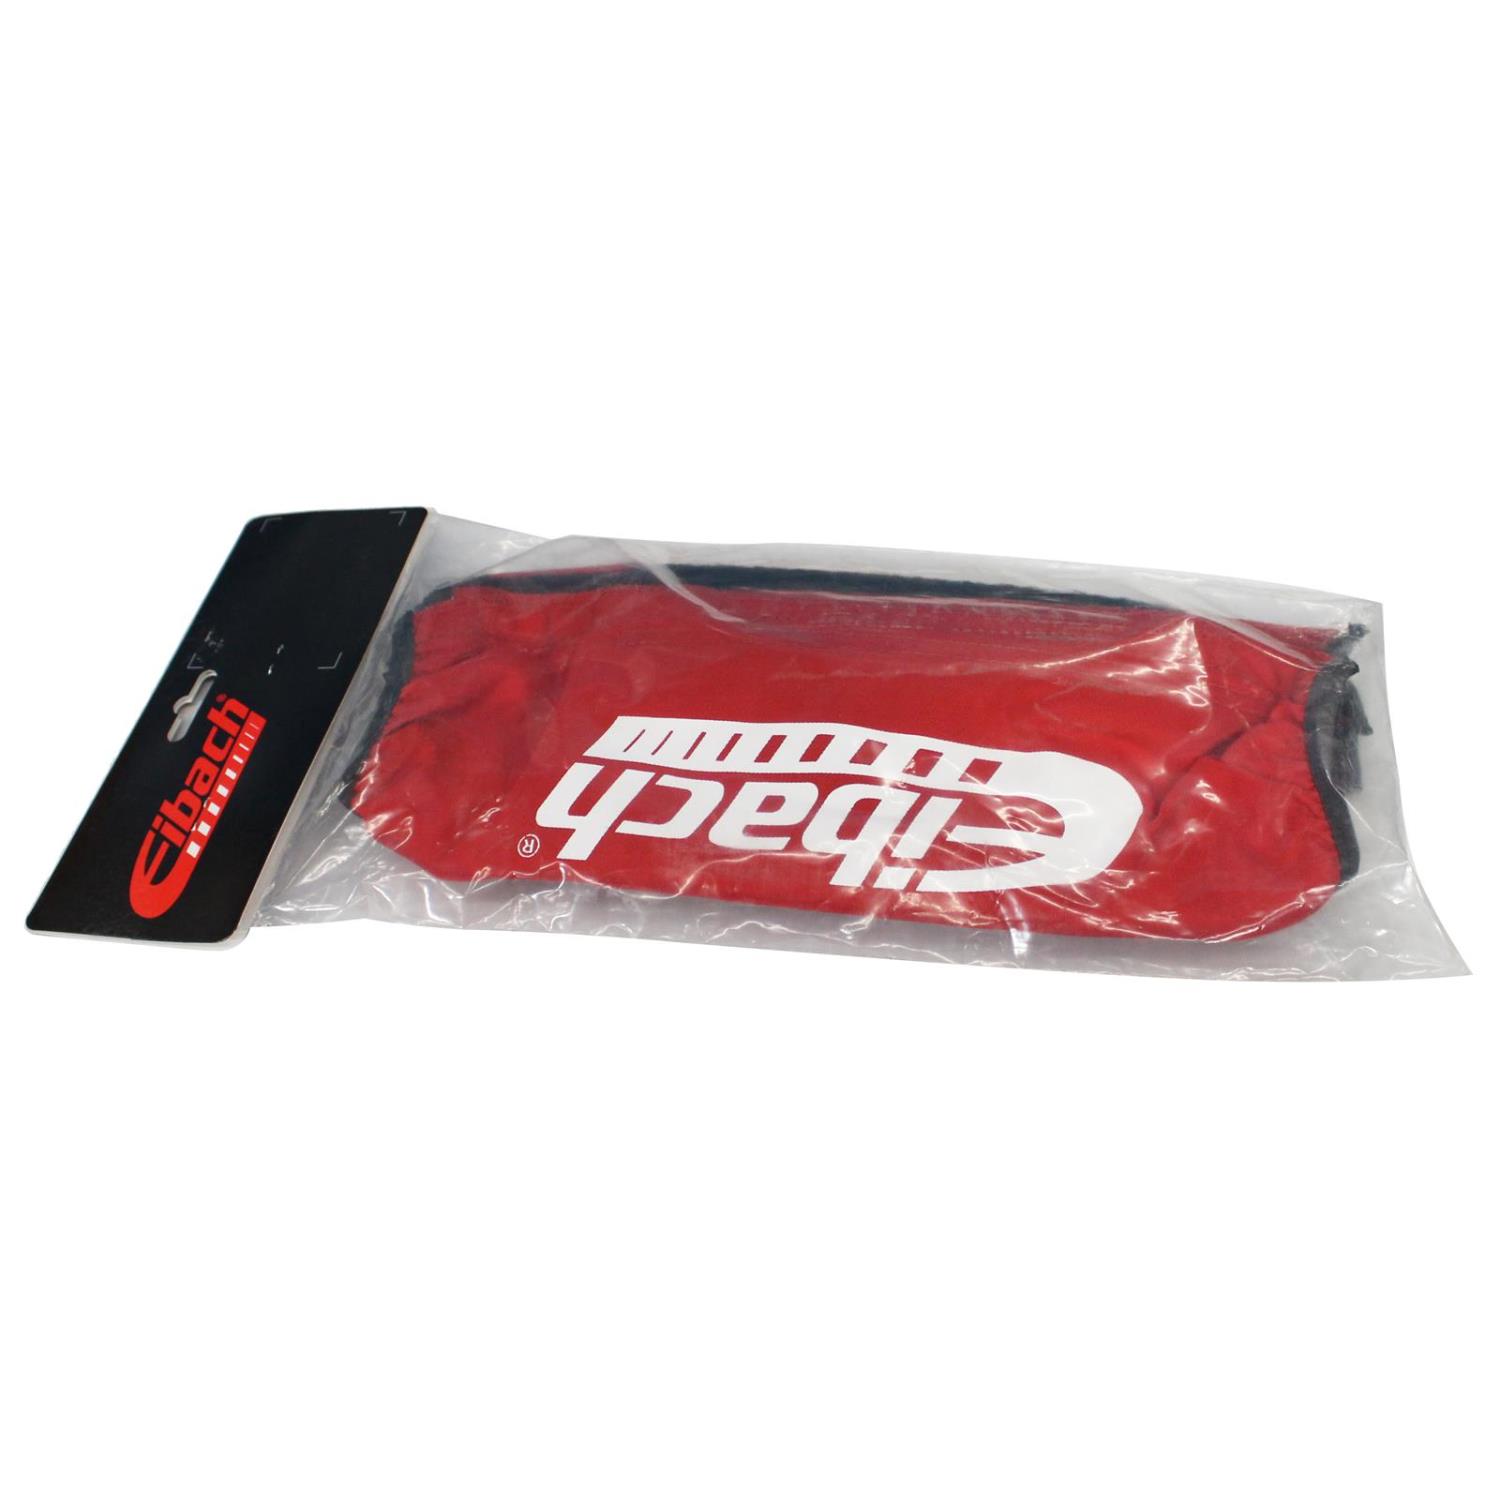 ESB10.250 Protective Spring Bags